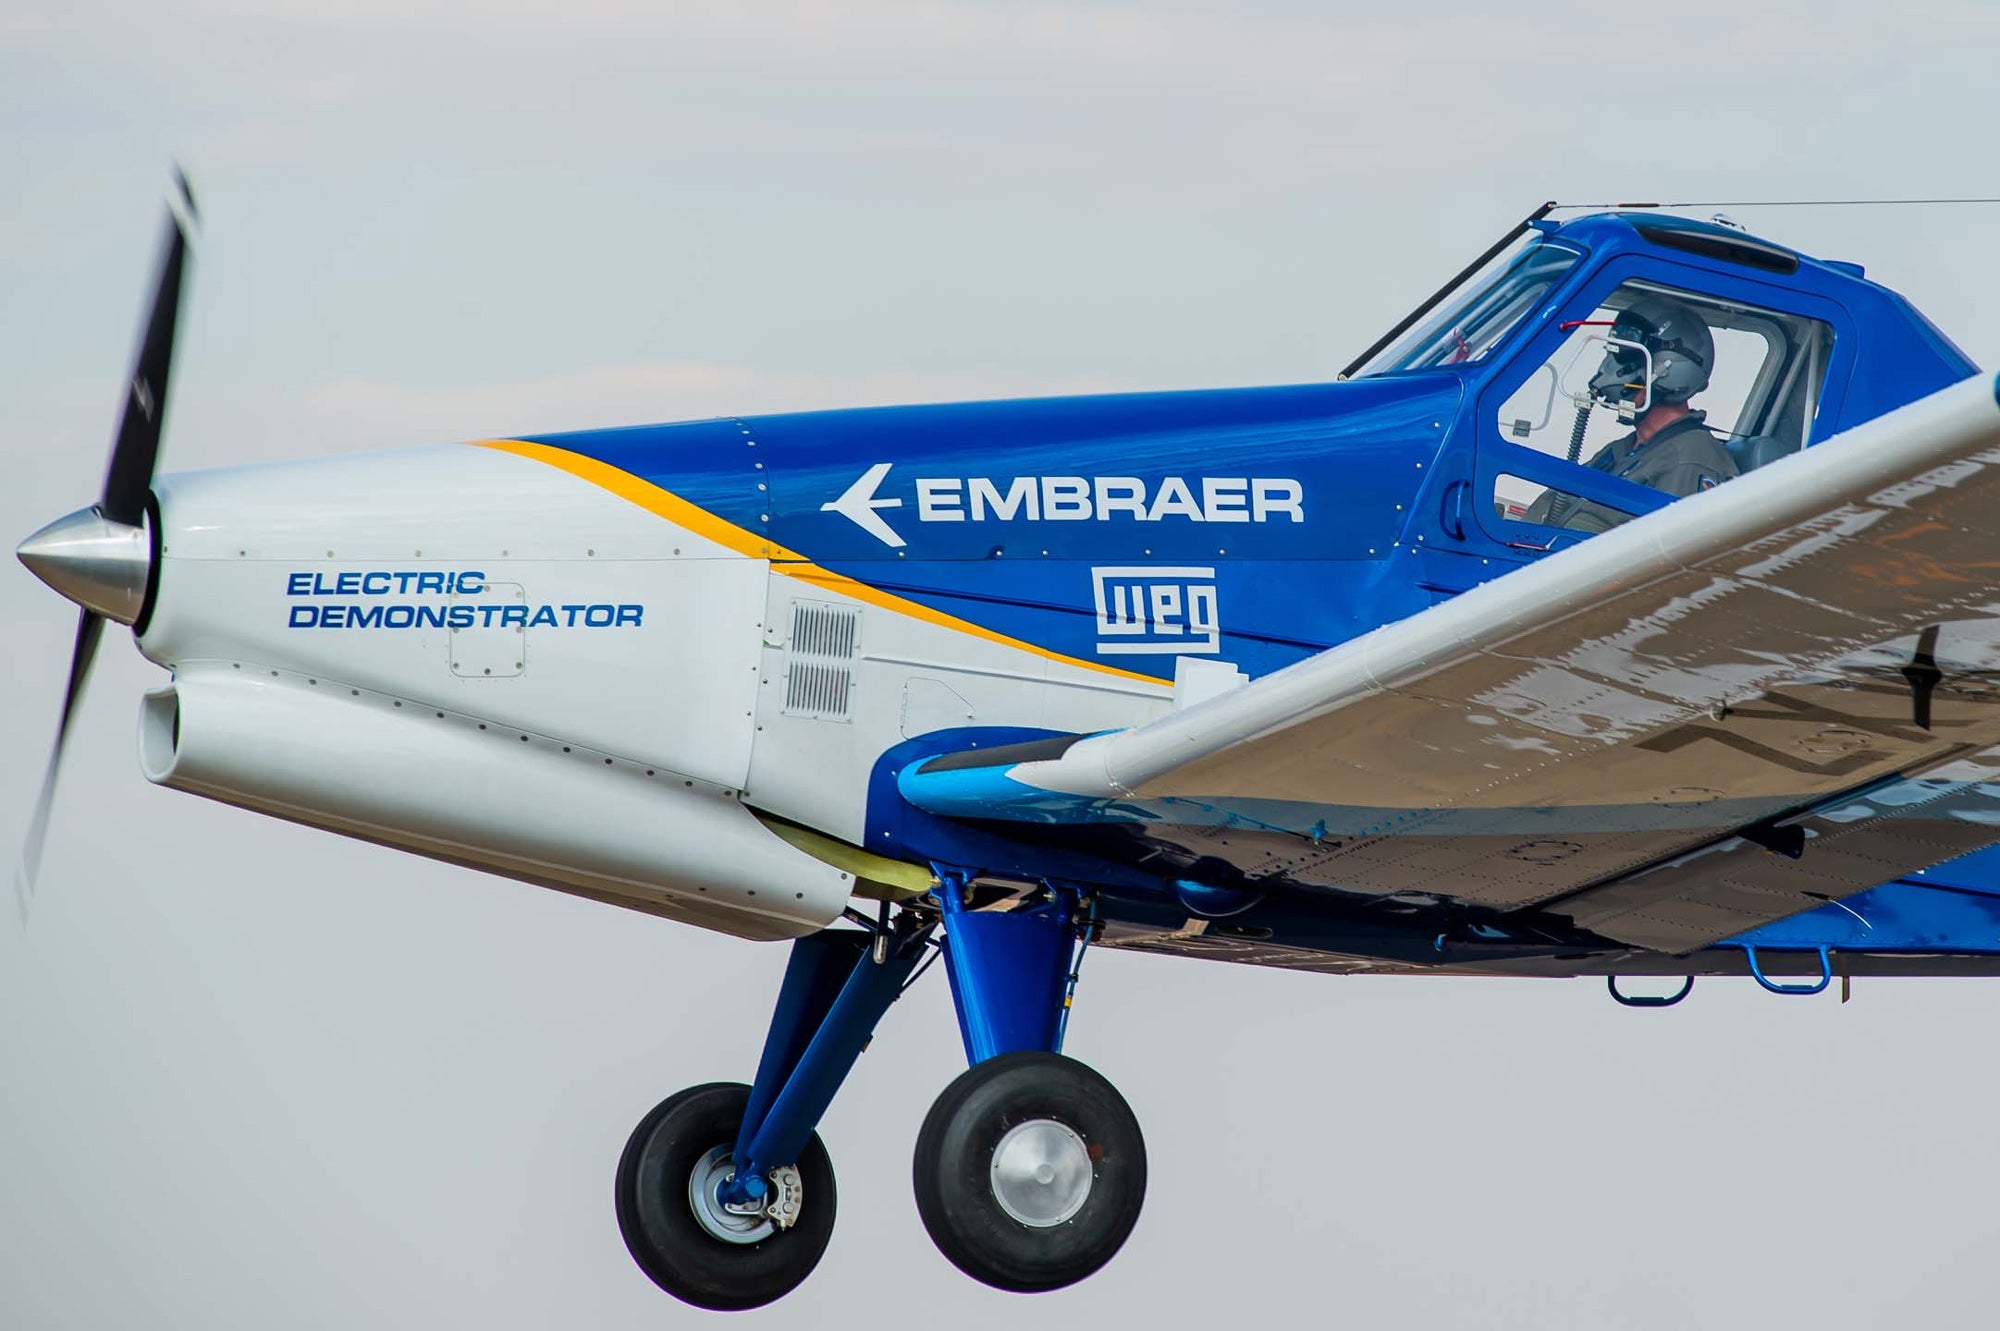 Embraer’s Electric Demonstrator Aircraft Begins Flight Test Campaign